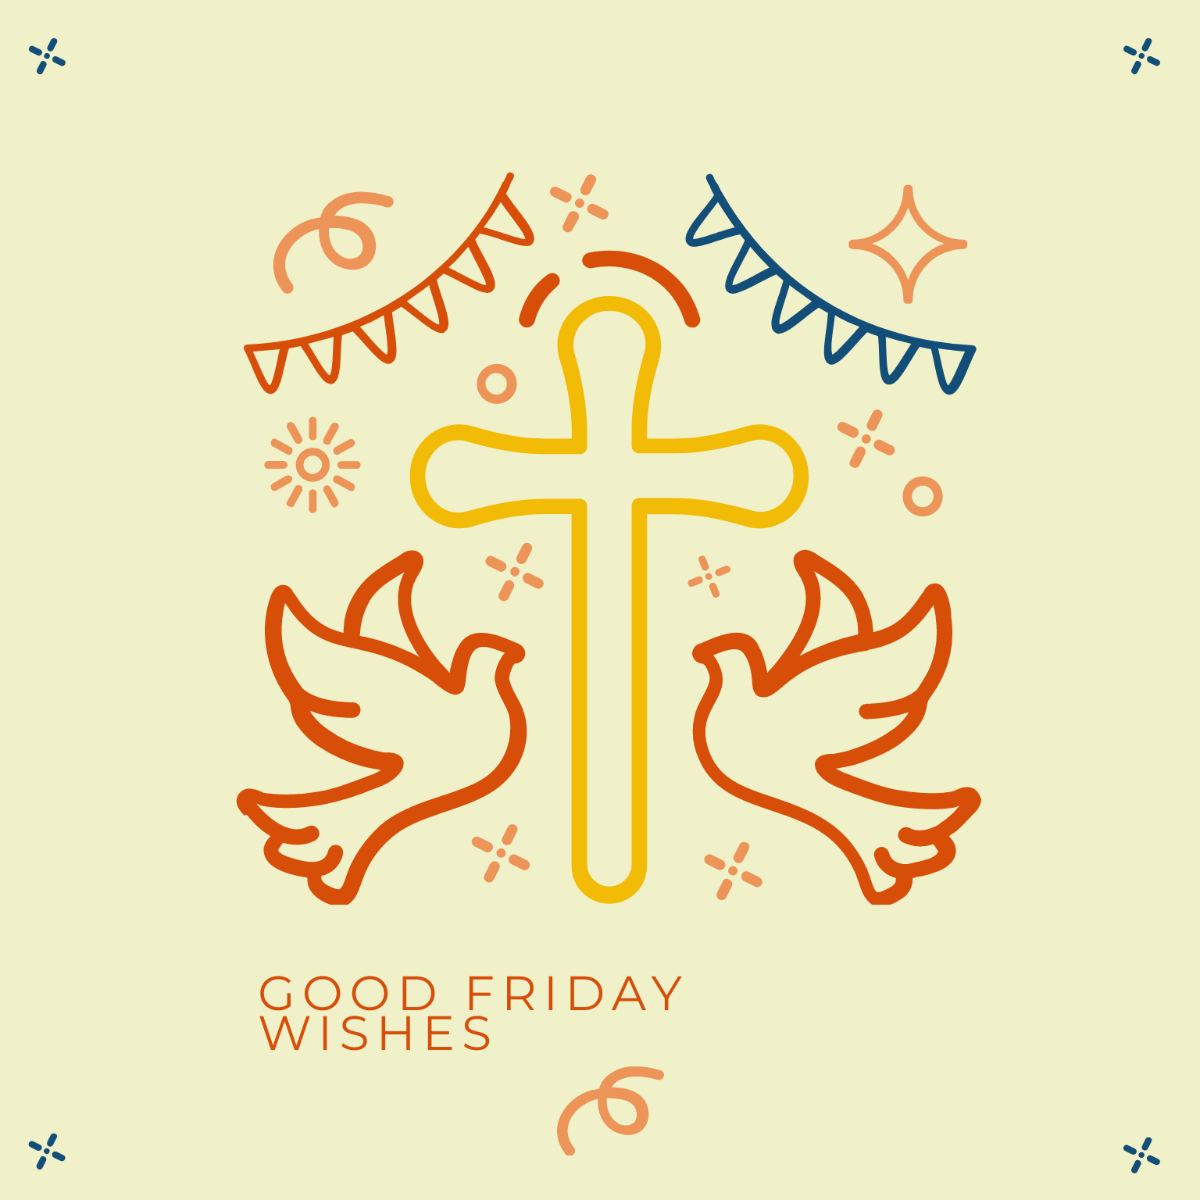 Good Friday Wishes Vector